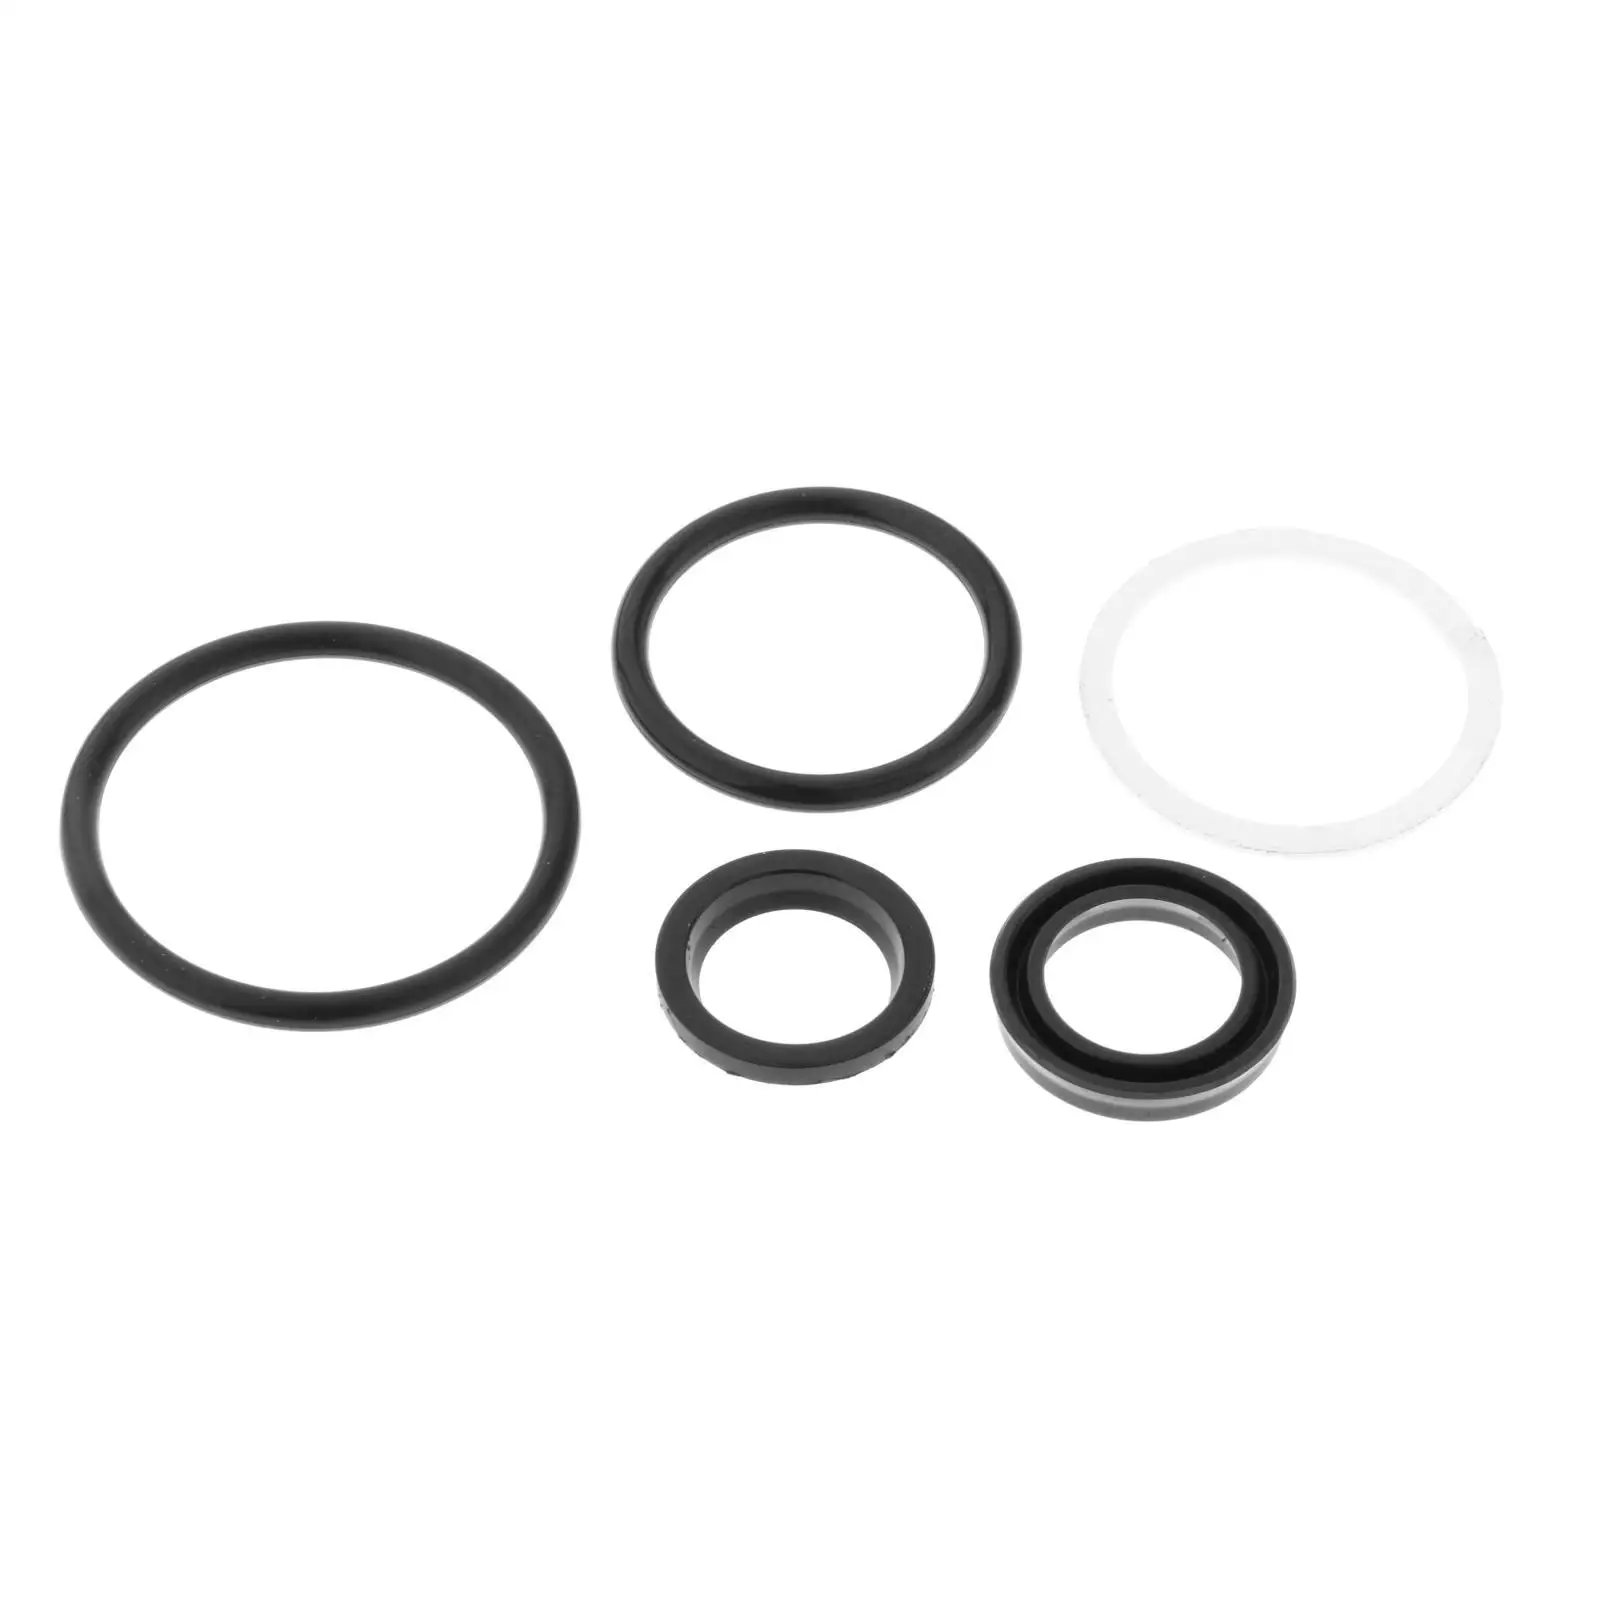 Seal and O-Ring Screw Trim Cylinder Repair Kit Replaces 6E5-43874-01 Ring Trim Cylinder Repair Kit Fit for Yamaha Outboard